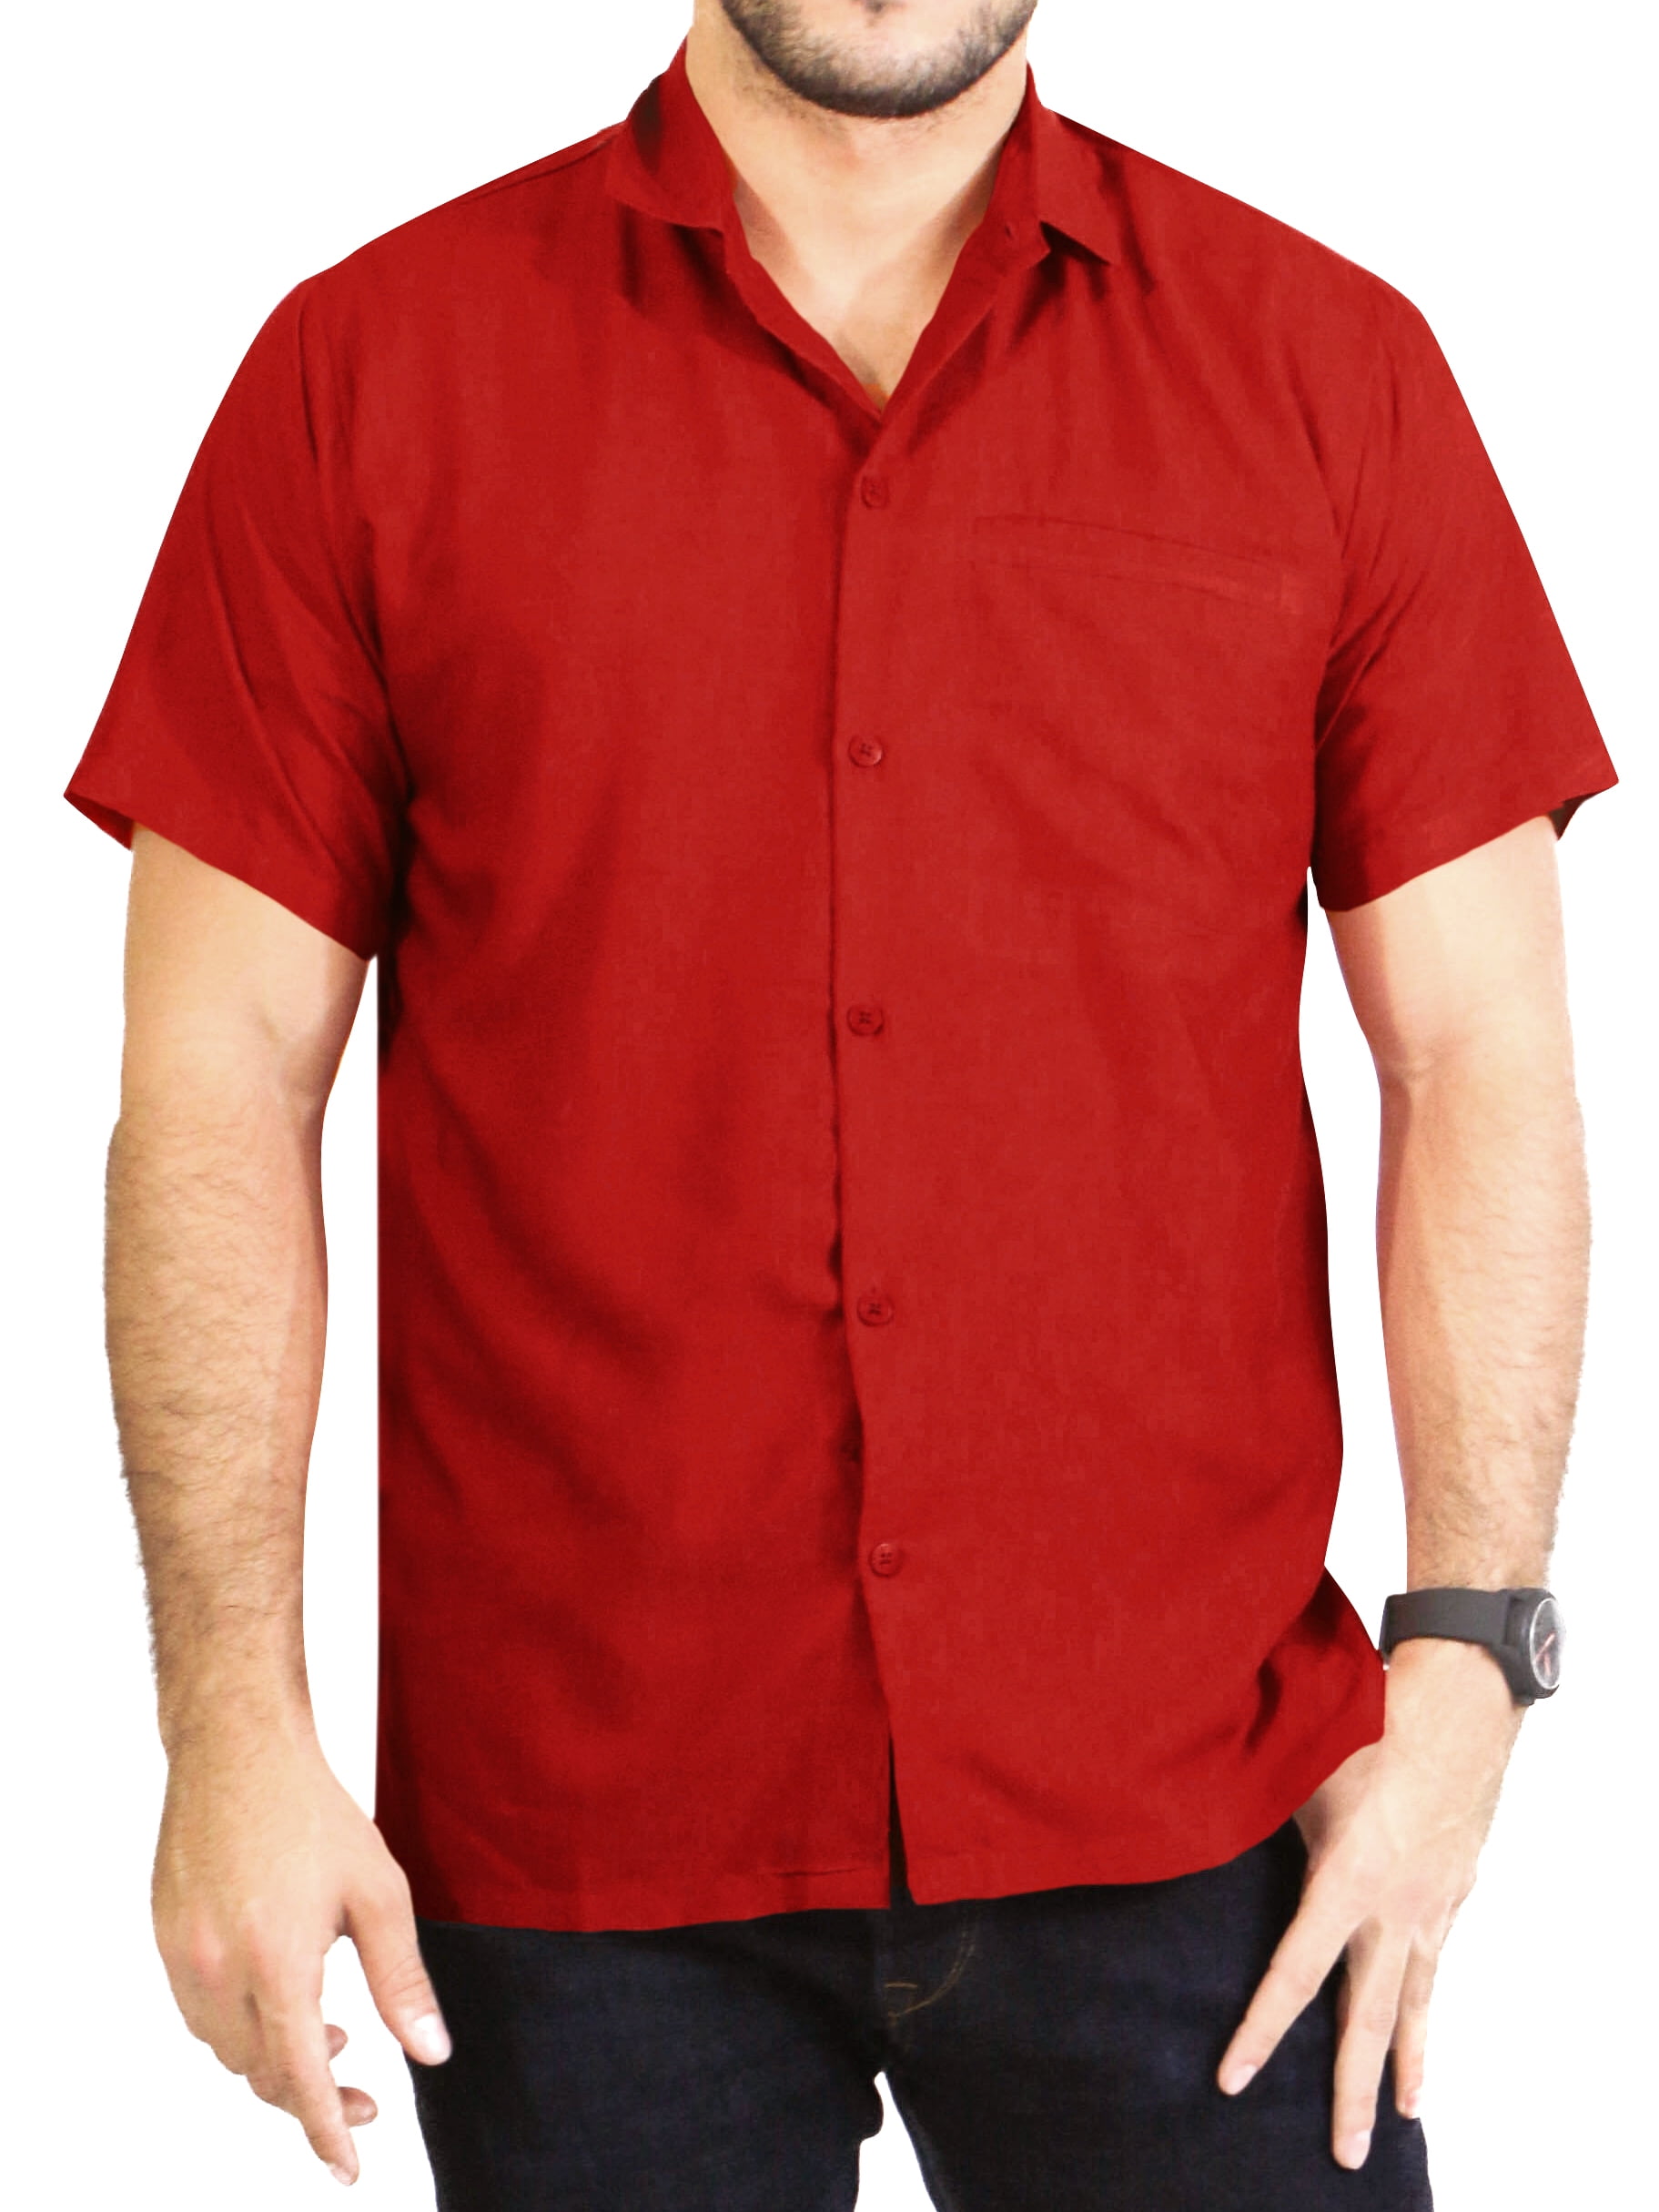 HAPPY BAY Men's Casual Button Down Short Sleeve Dress Work Shirt Oxford  Solid Shirts for Men S Red, Plain